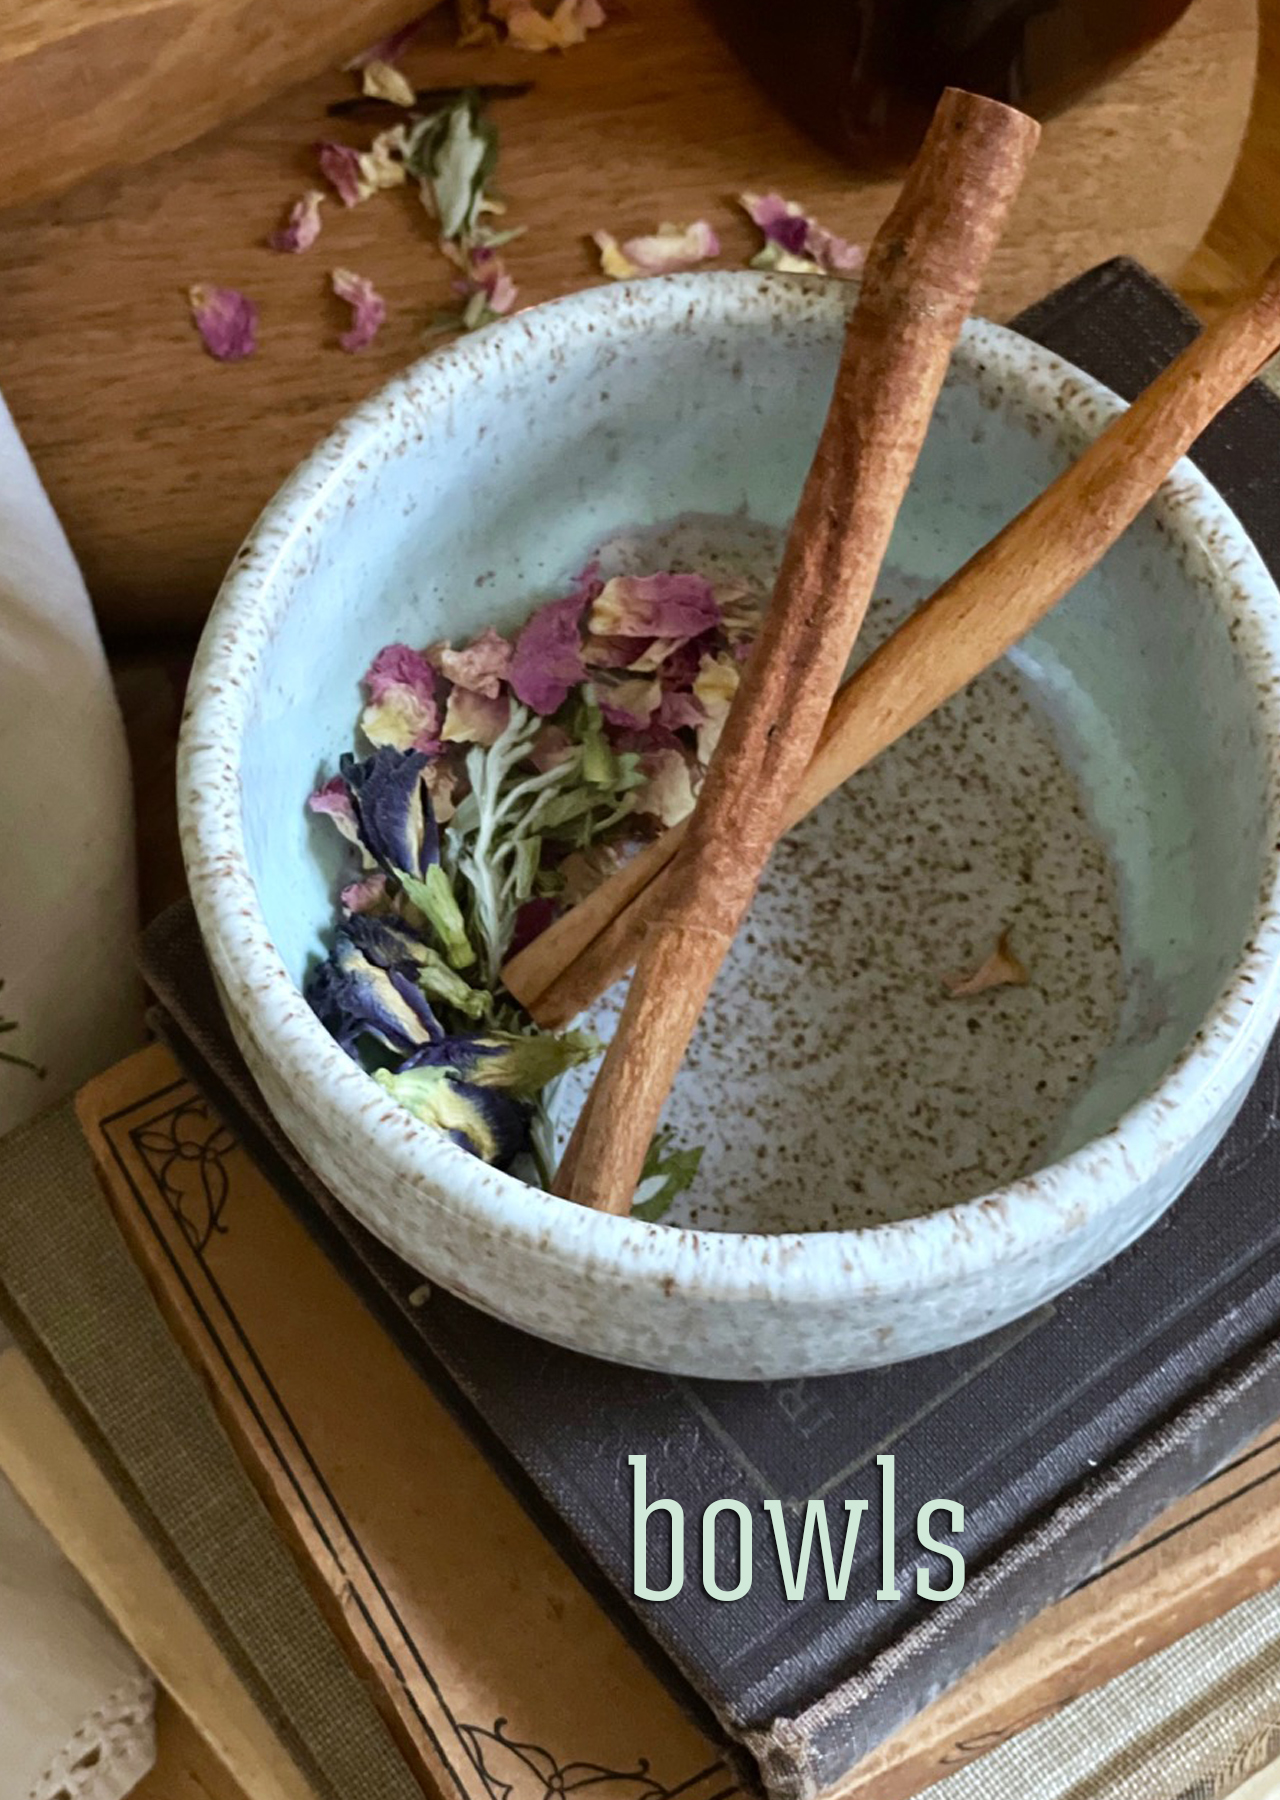 Icy blue bowl with the speckles of the clay coming through the glaze, styles on old books with cinnamon sticks and dried rose petals and mugwort